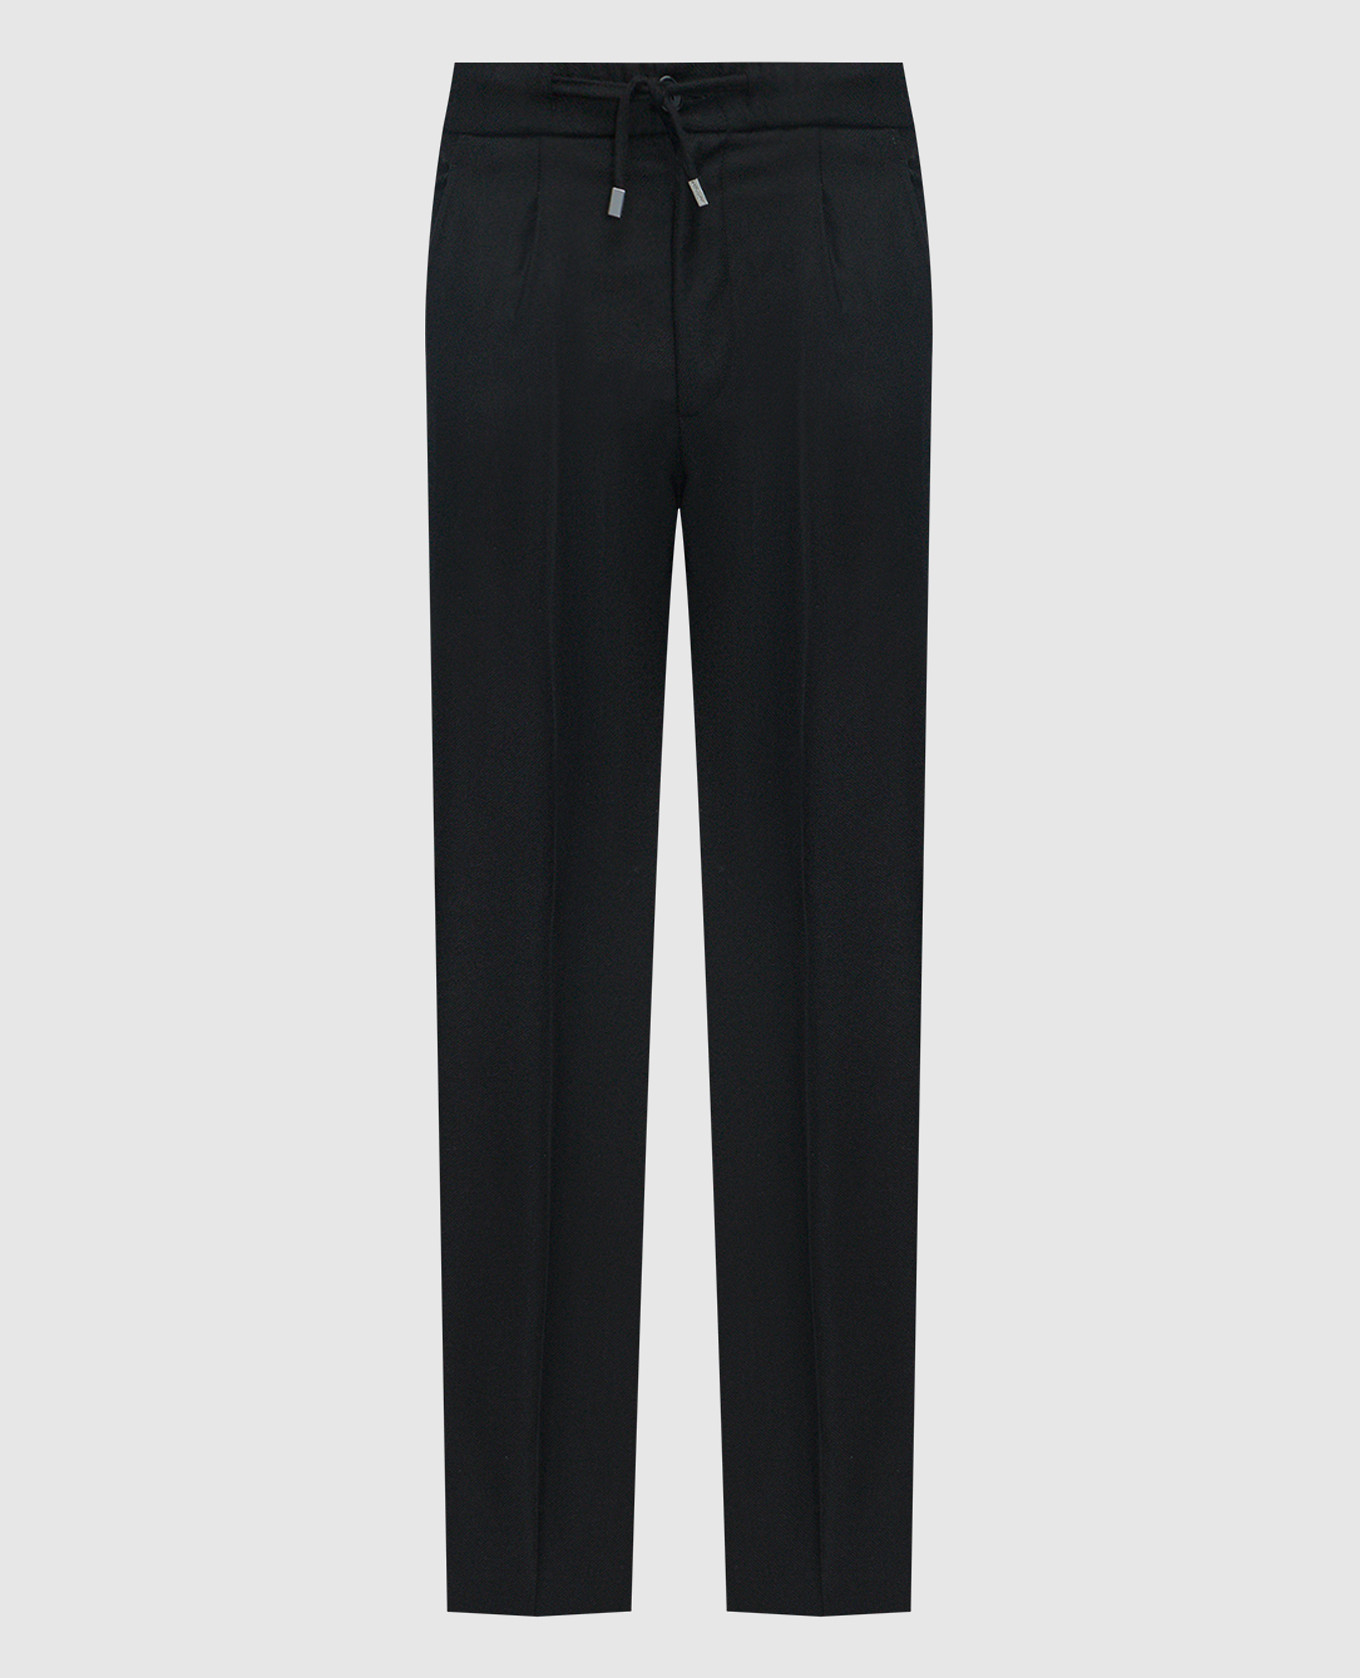 Black wool and cashmere trousers